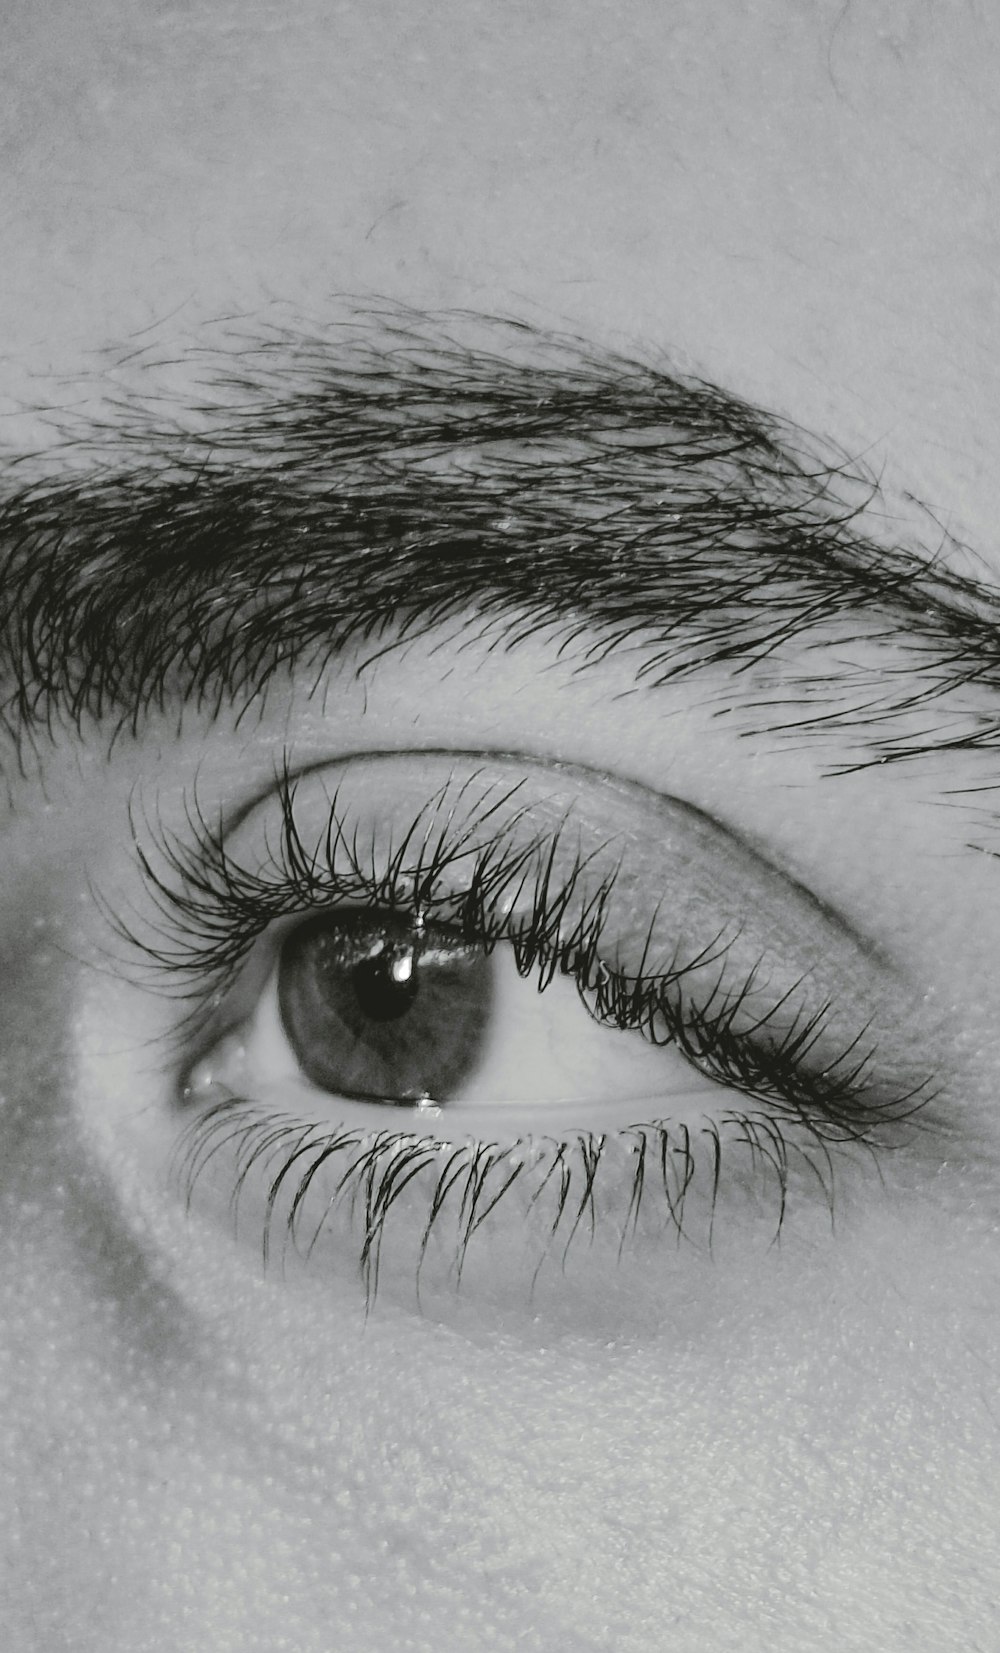 a black and white photo of a person's eye